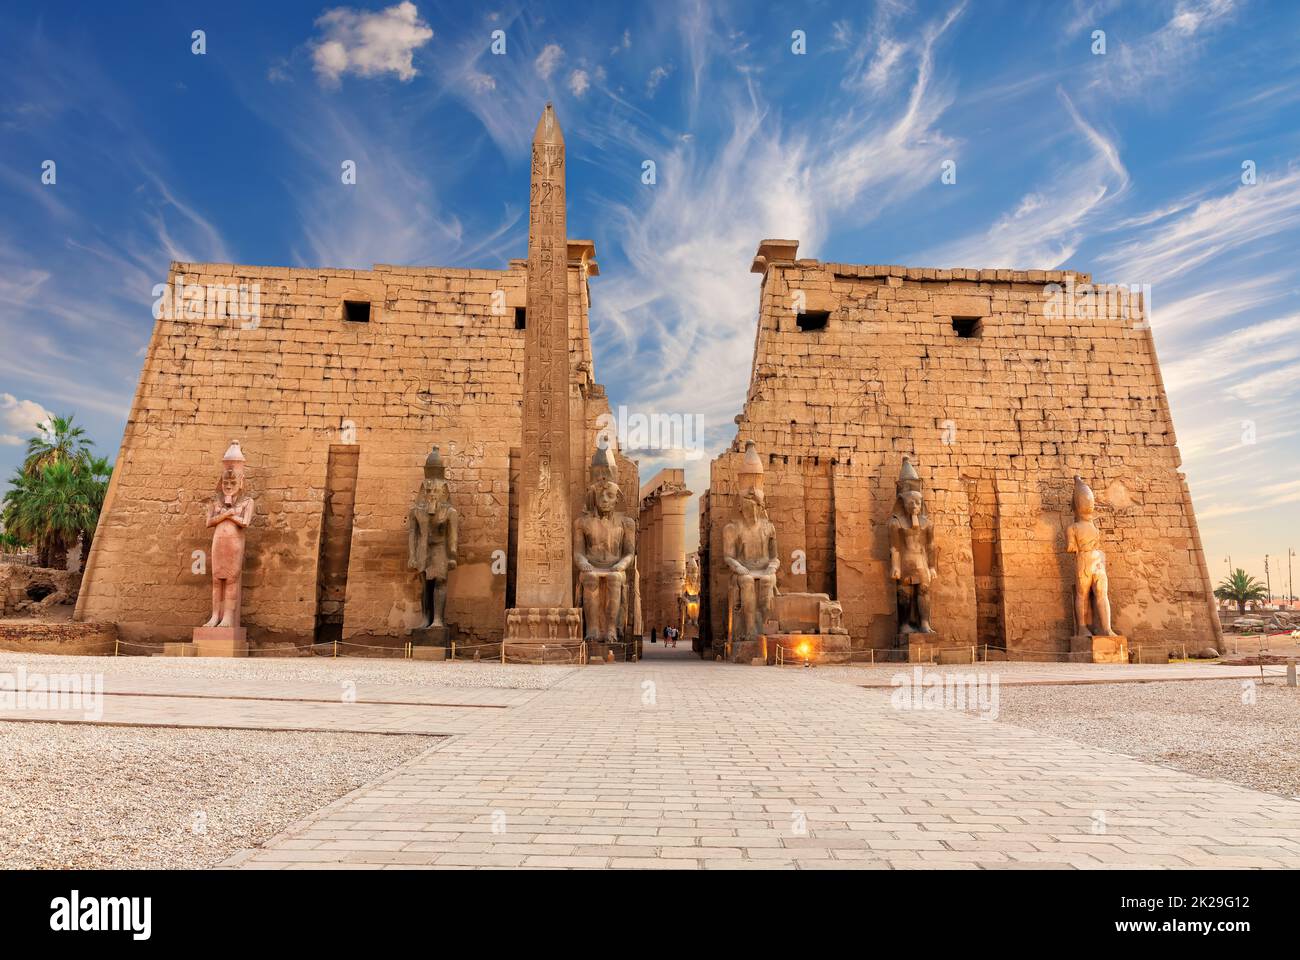 World famous Luxor Temple, view of the main entrance, Egypt Stock Photo